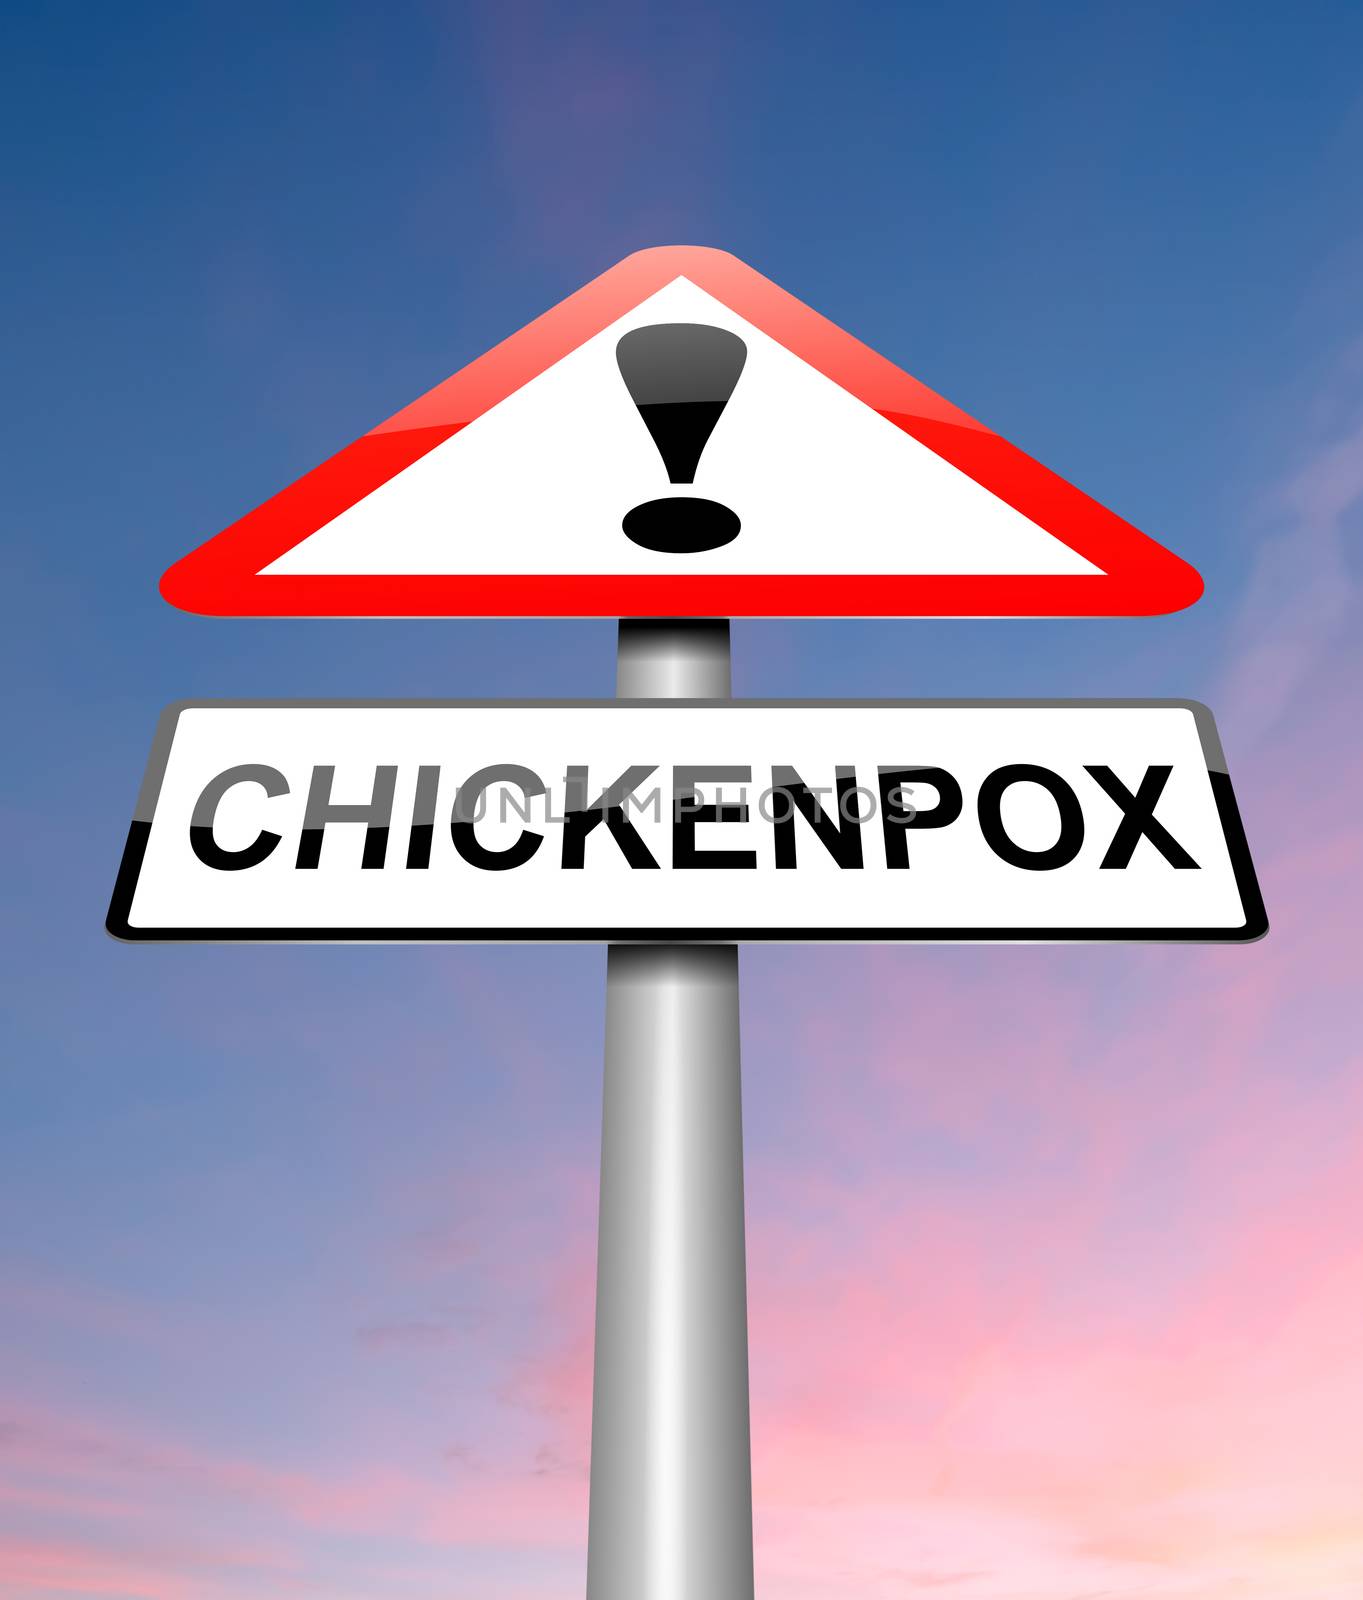 Chickenpox concept. by 72soul